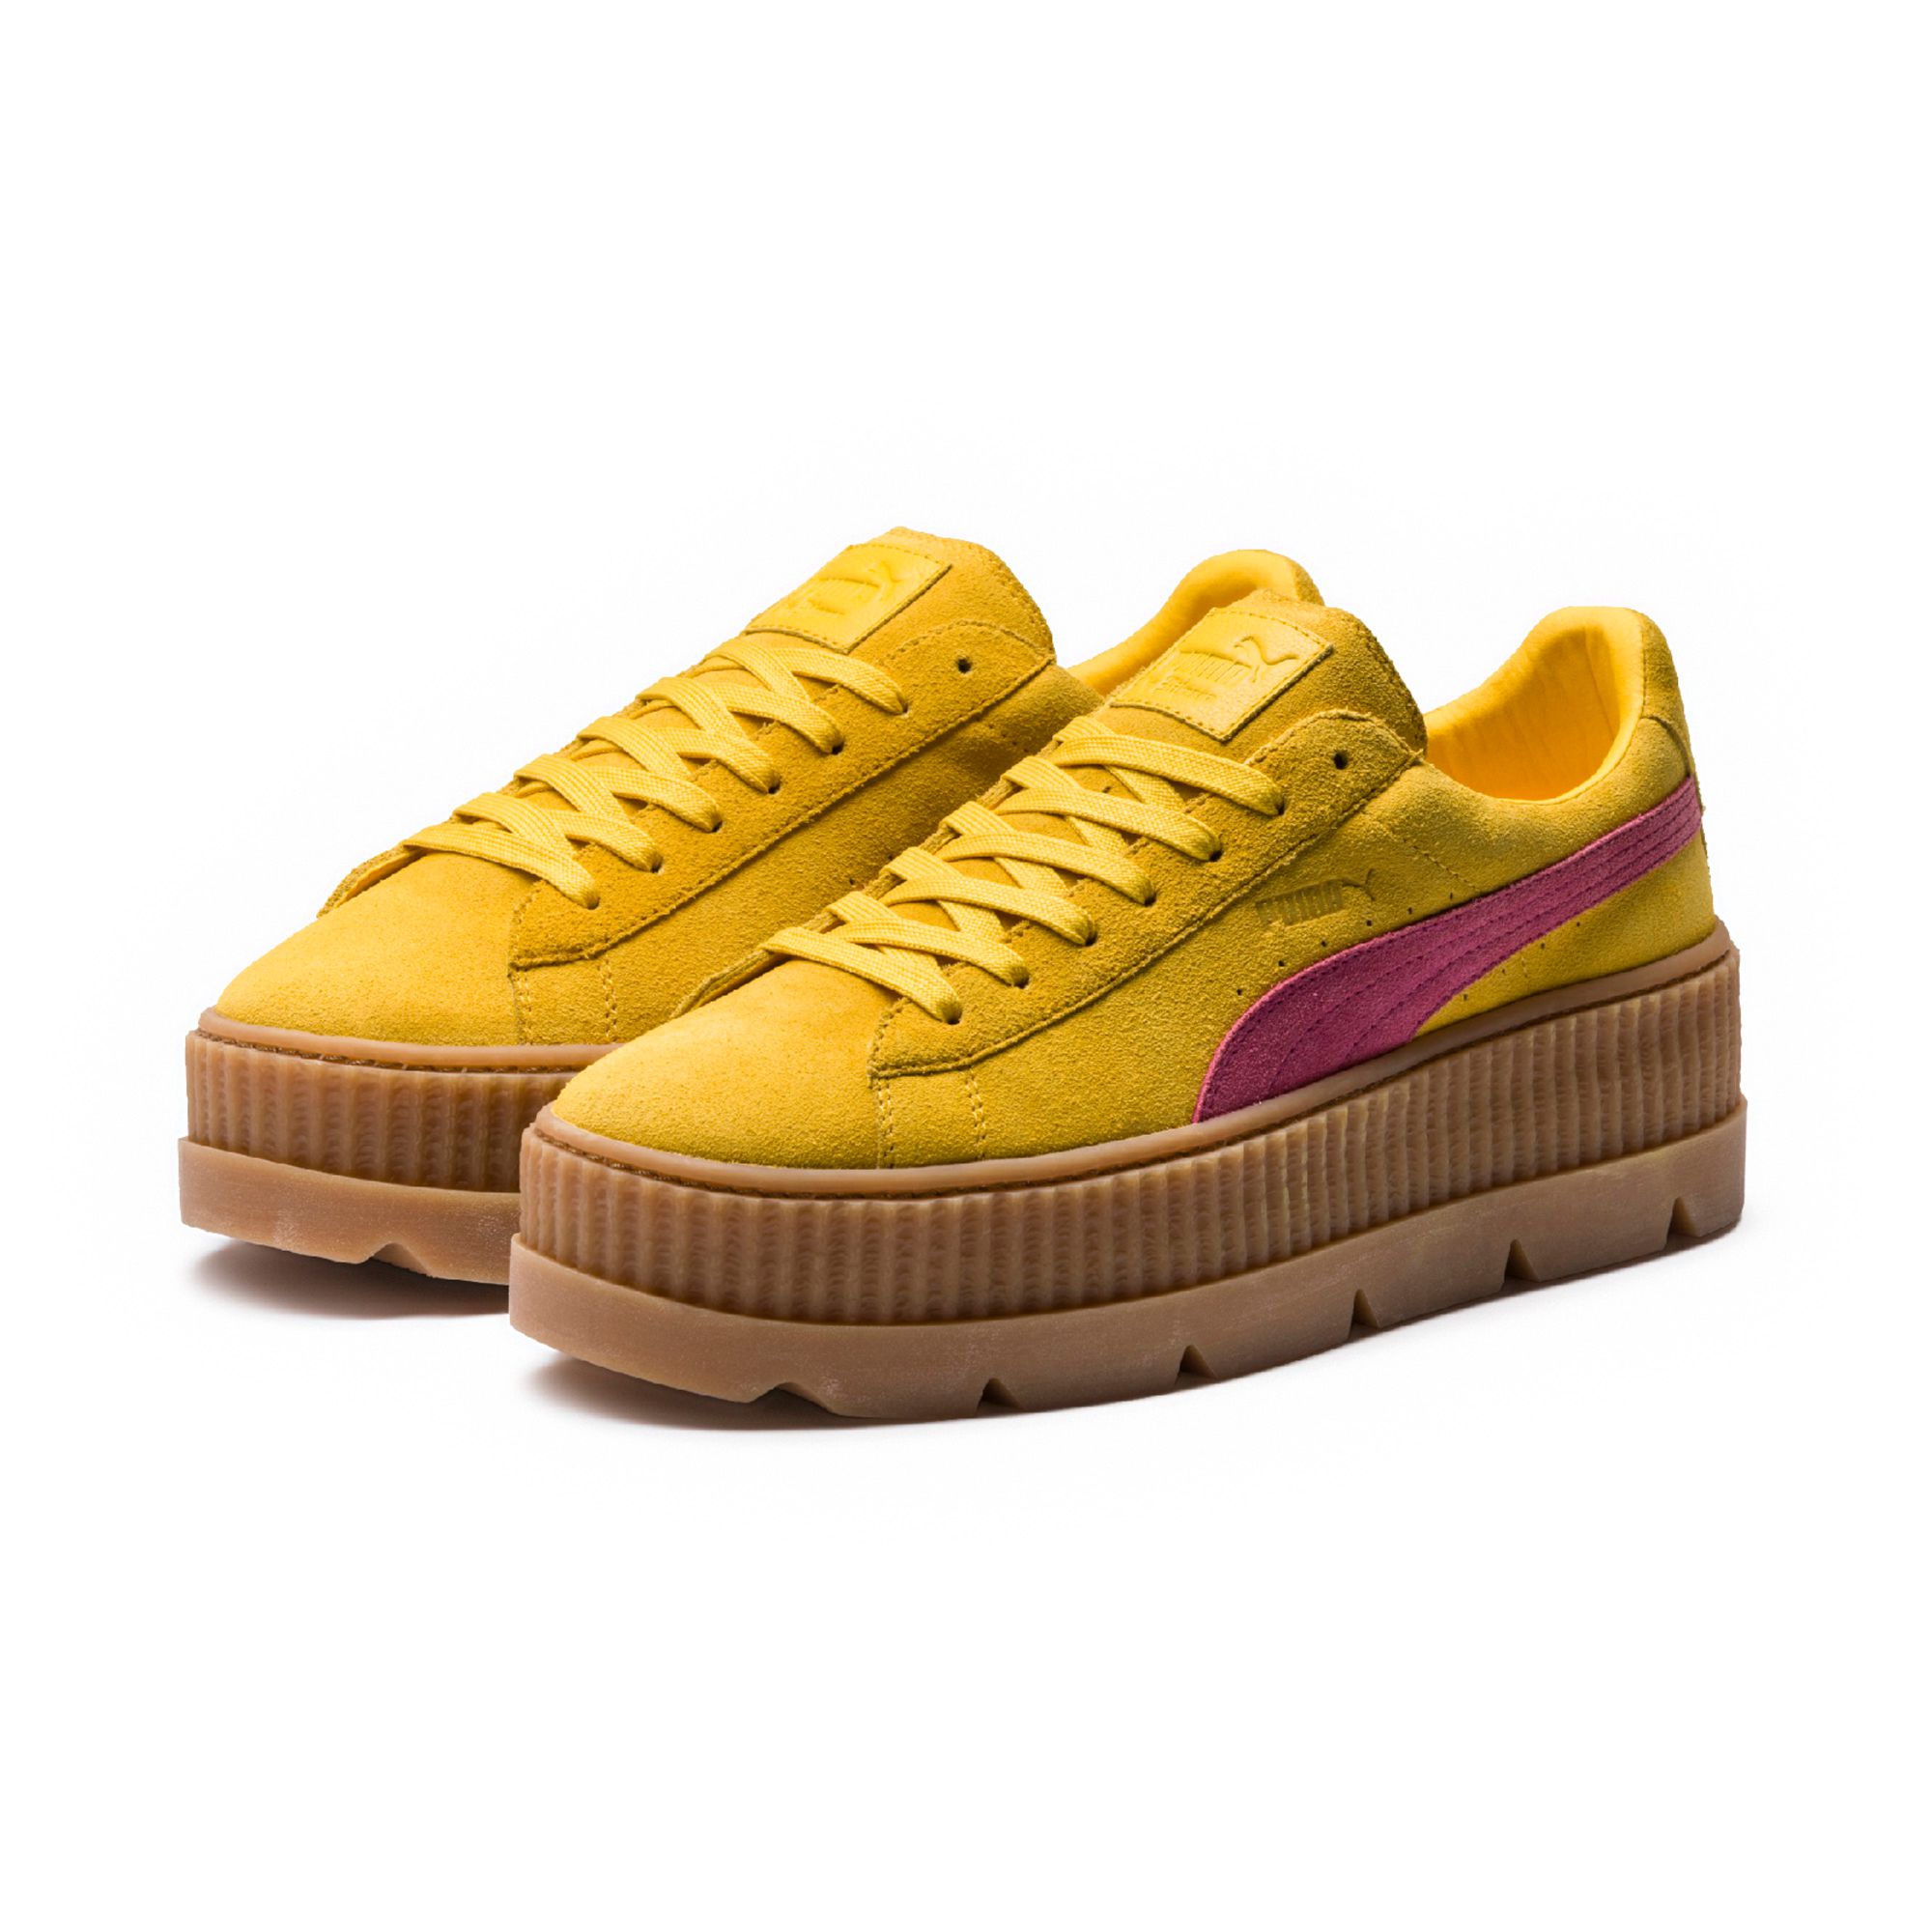 ФЕНТИ дамы Suede Cleated Creeper